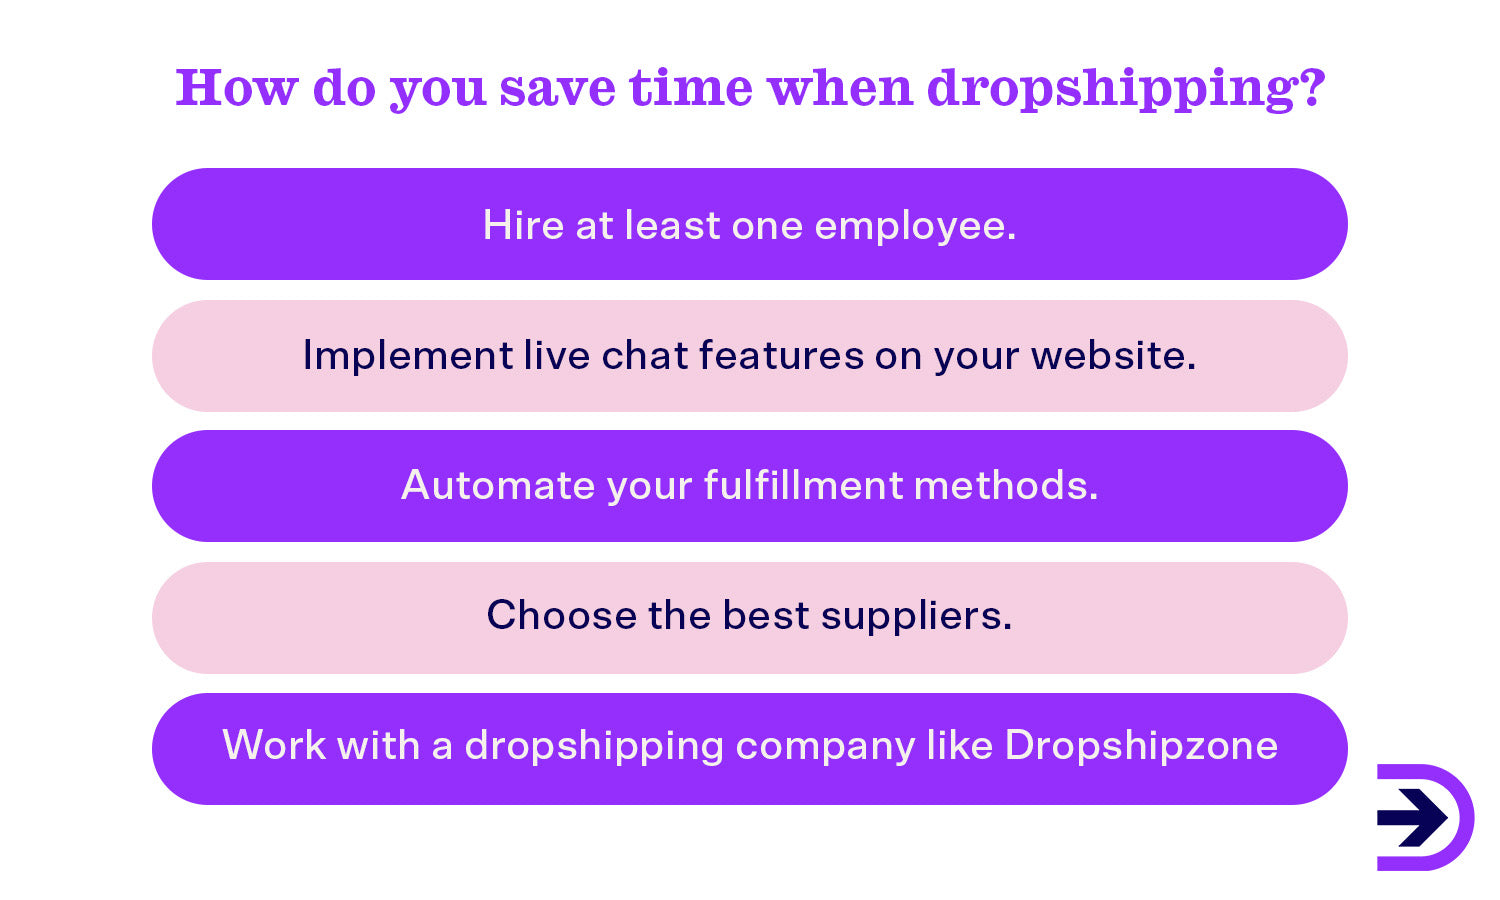 Save time as a dropshipper by automating fulfillment methods and choosing reputable suppliers.